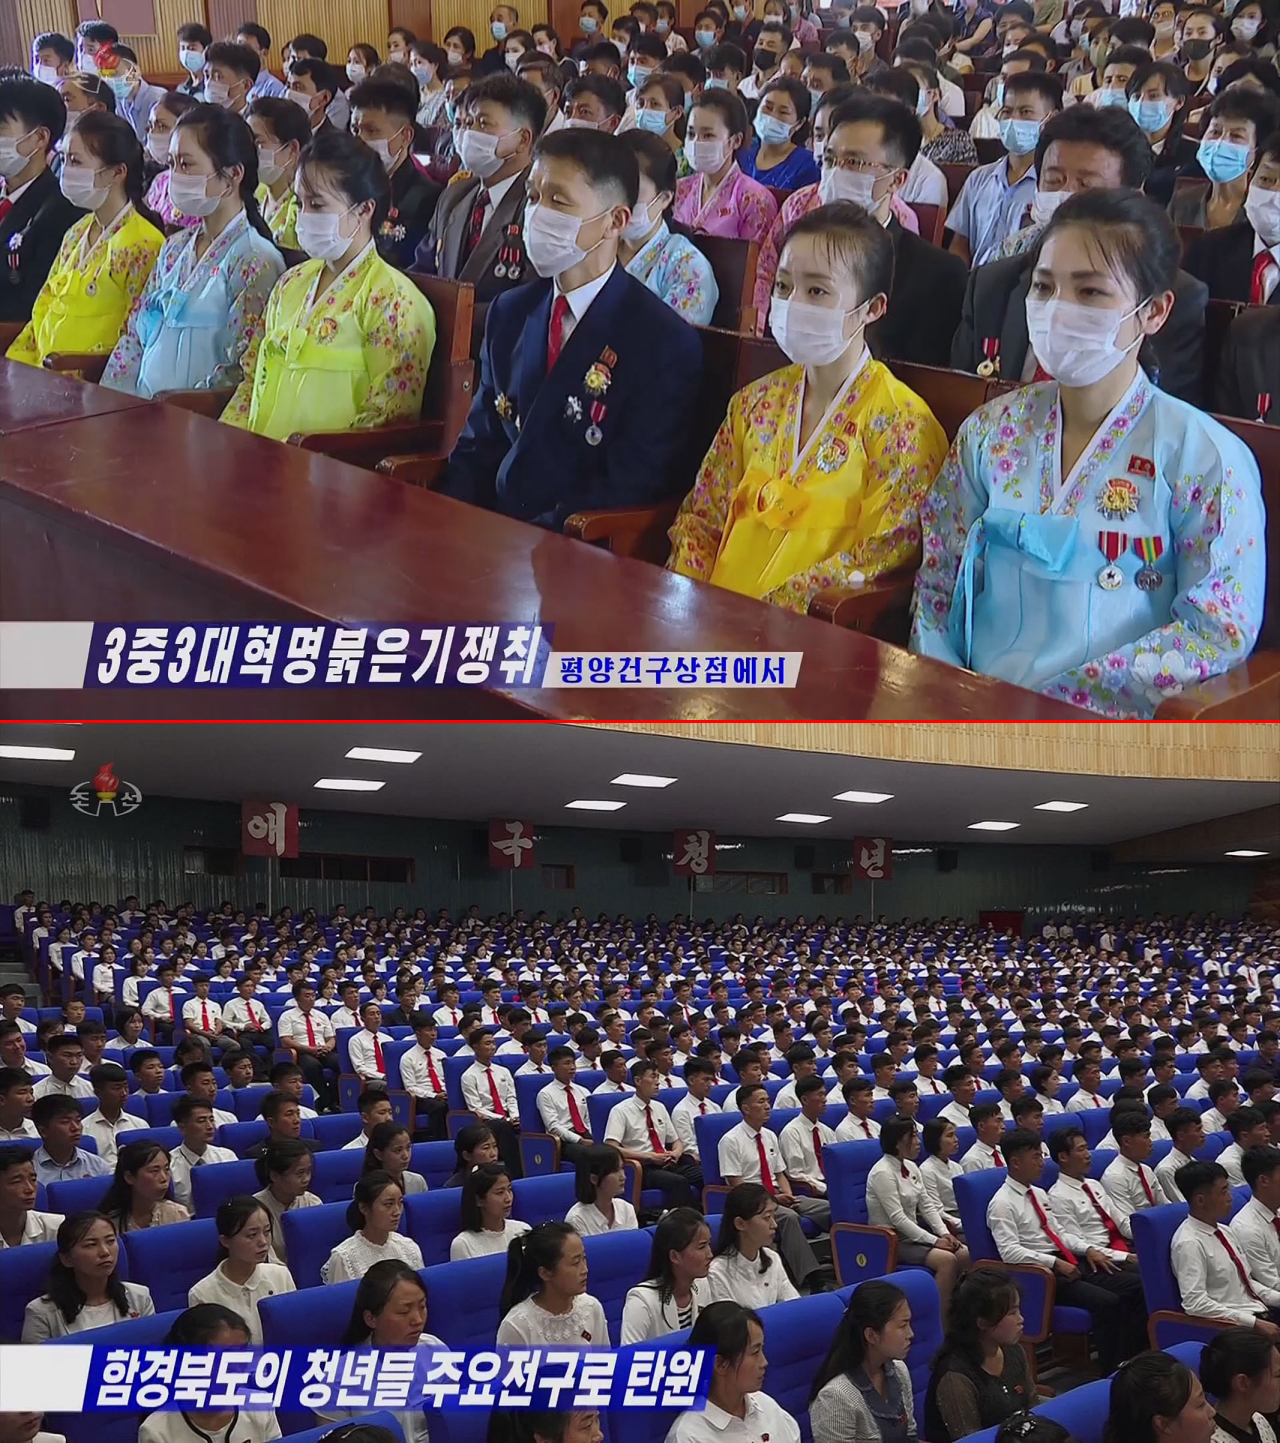 This photo, captured from North Korea's official Korean Central Television, shows North Koreans (top) wearing face masks at an indoor event in Pyongyang on June 30. But young North Koreans (bottom) are seen without masks at a jam-packed theater in North Hamgyong Province on Monday. (Yonhap)